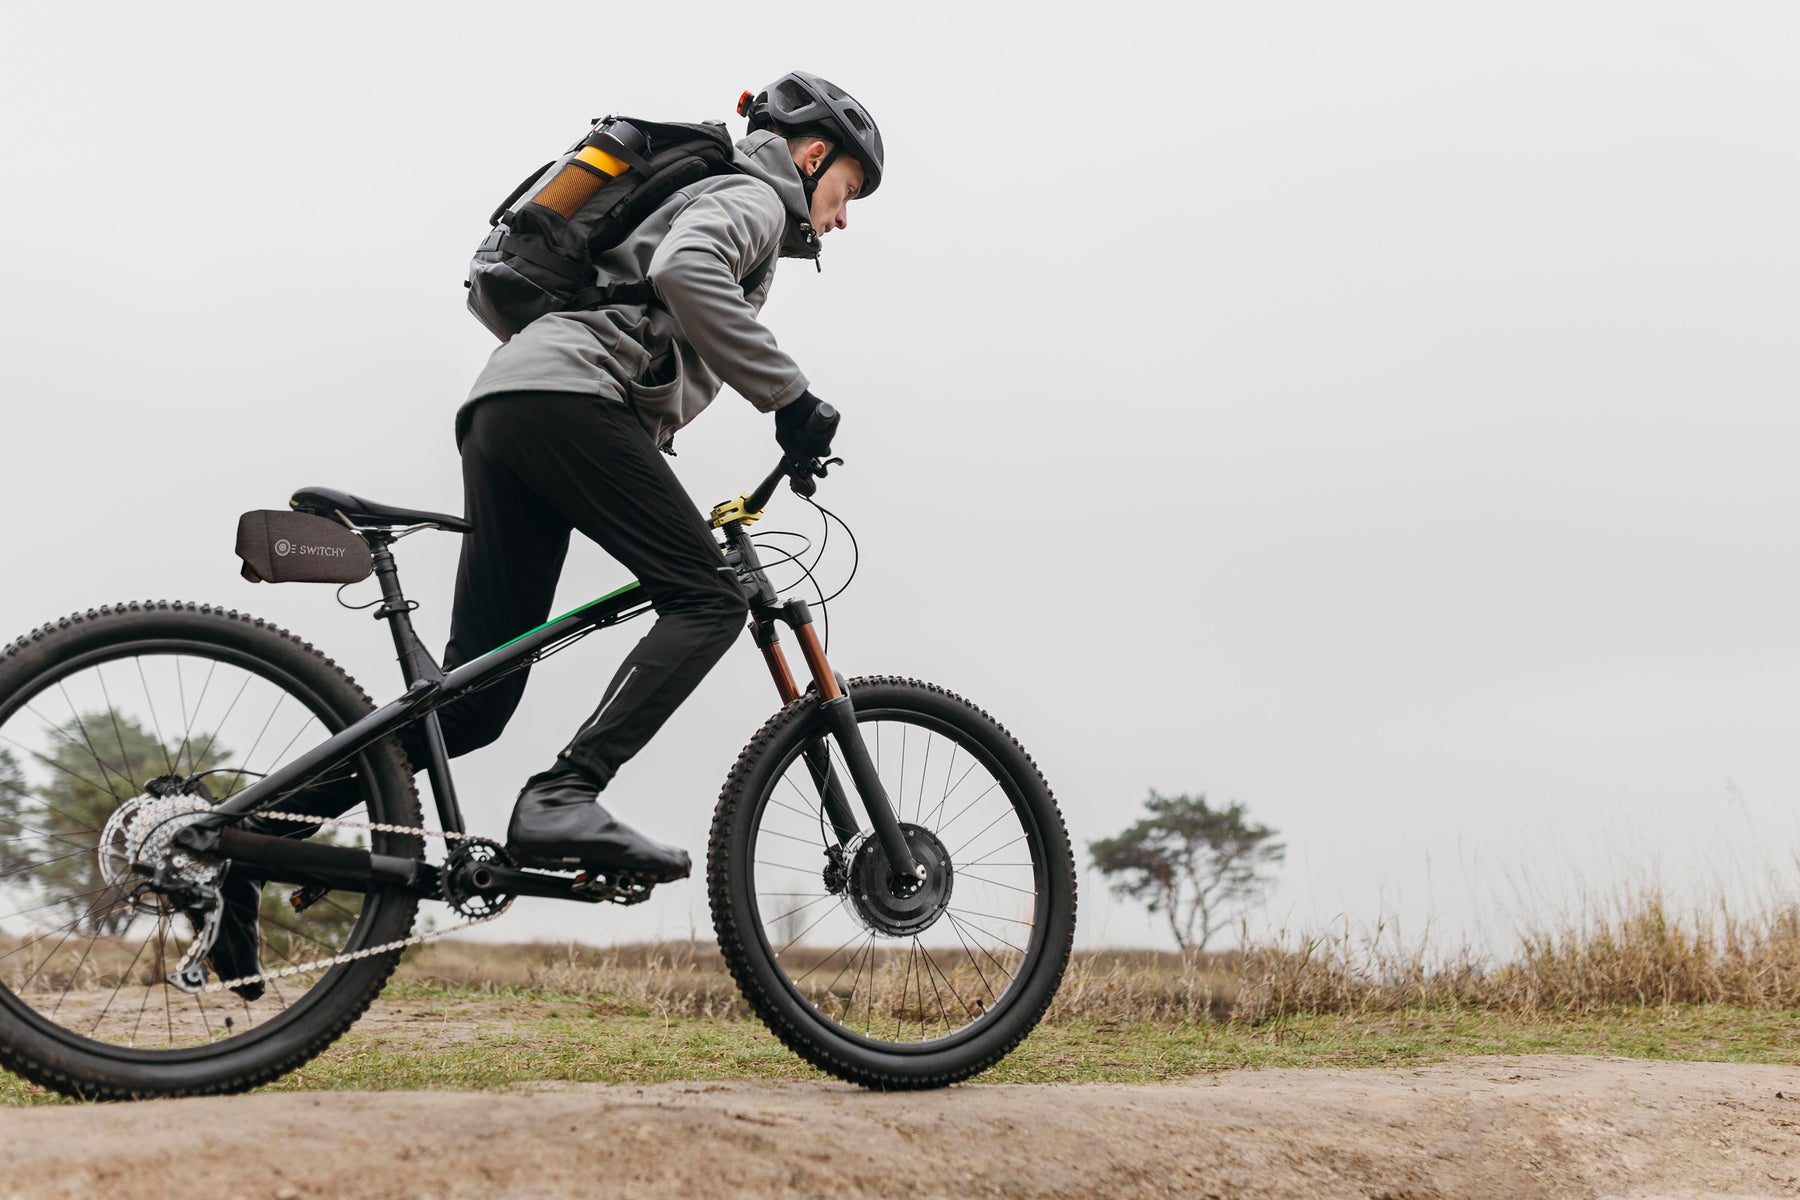 Switch Three electric bike kit allow you to convert your own bicycle into an ebike